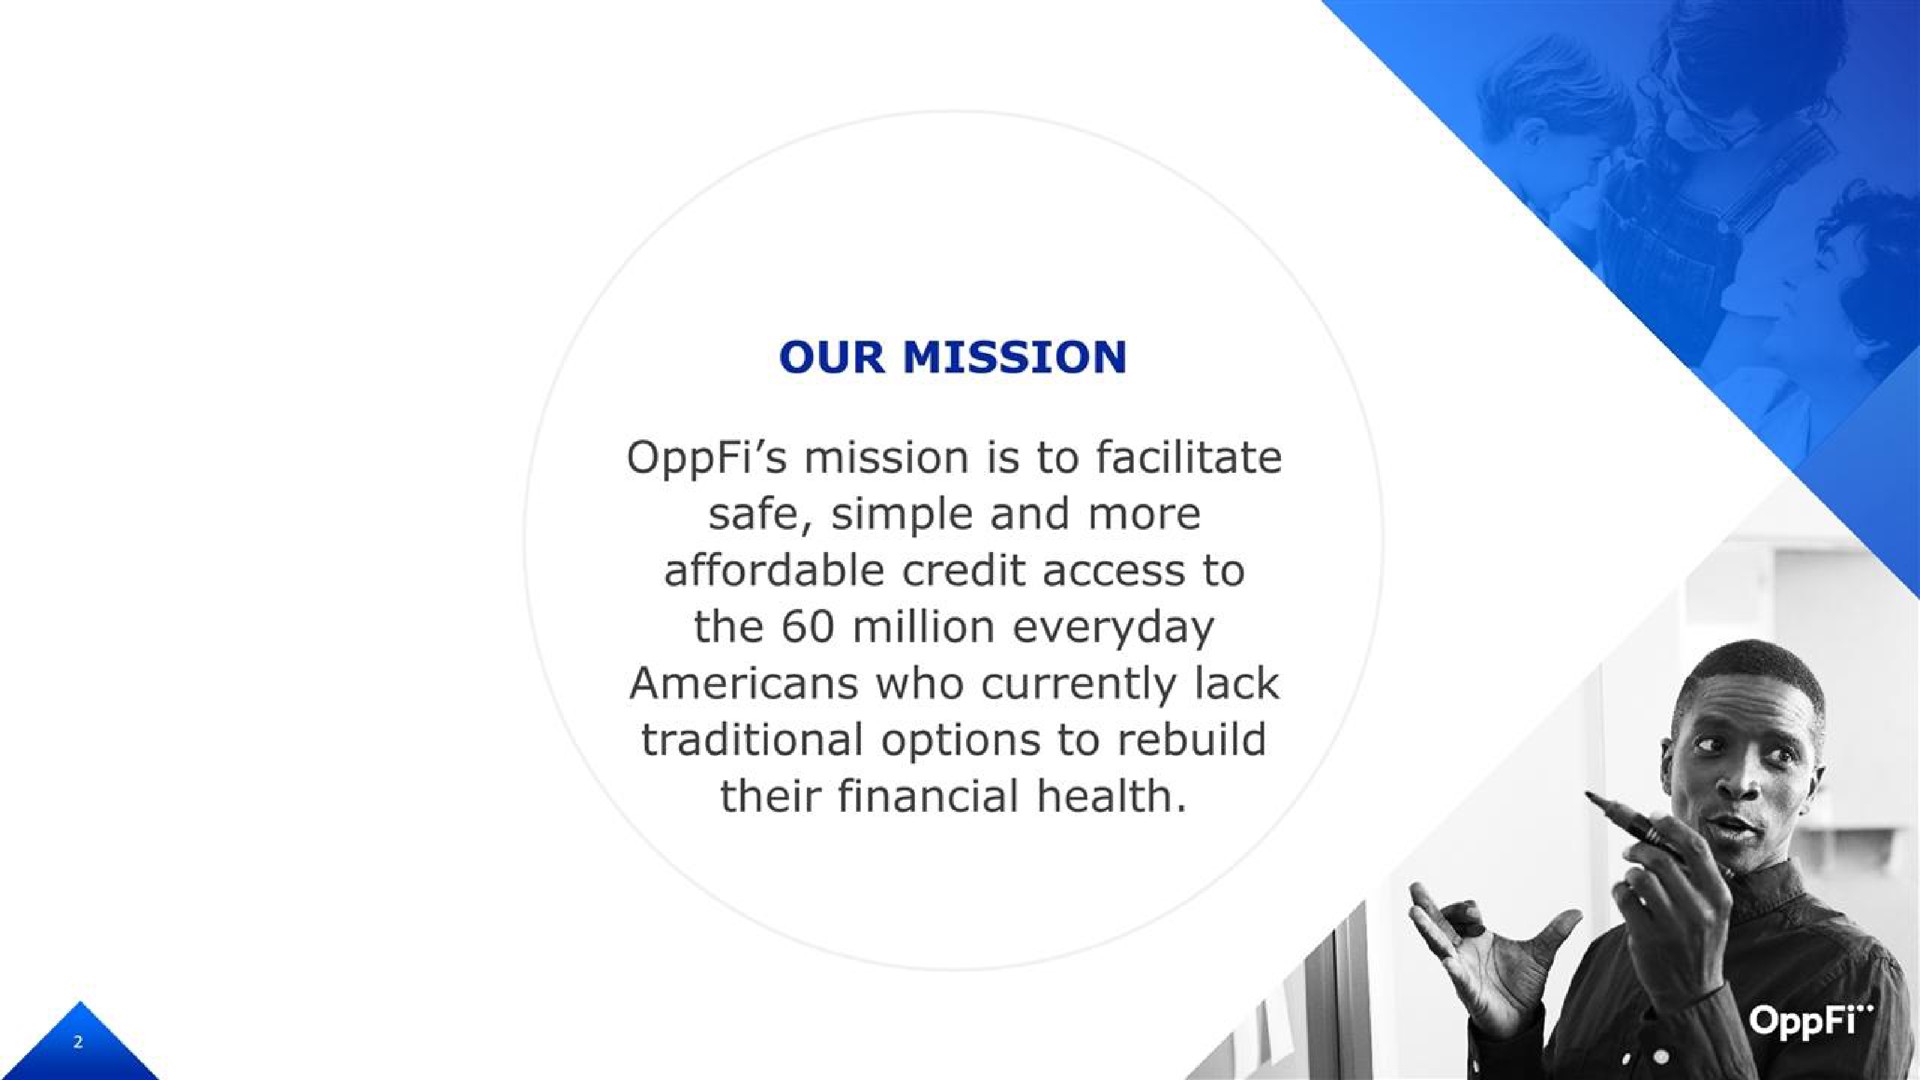 our mission mission is to facilitate safe simple and more affordable credit access to the million everyday who currently lack traditional options to rebuild their financial health | OppFi